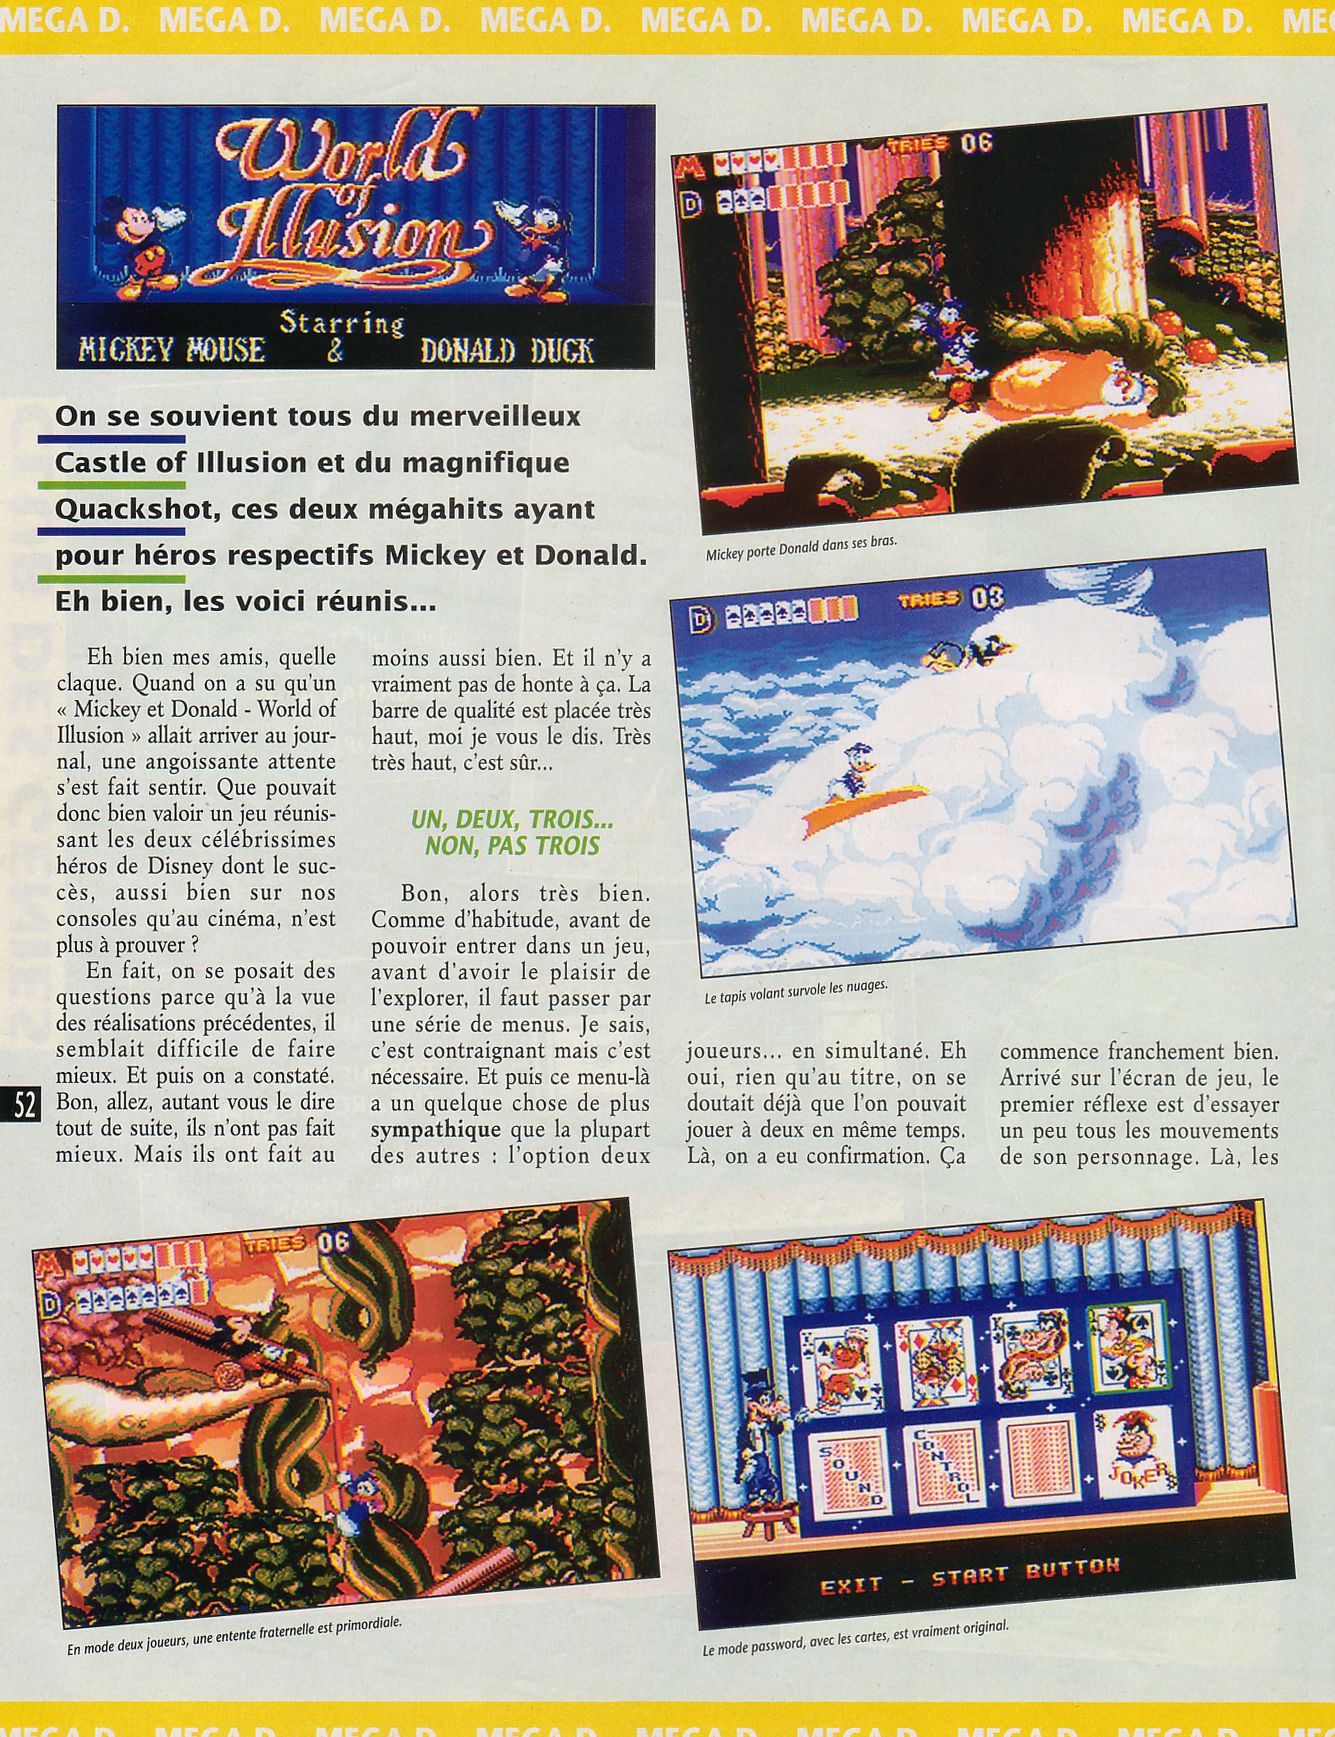 [TEST] World of Illusion (Mega Drive) Player%20One%20026%20-%20Page%20052%20%281992-12%29